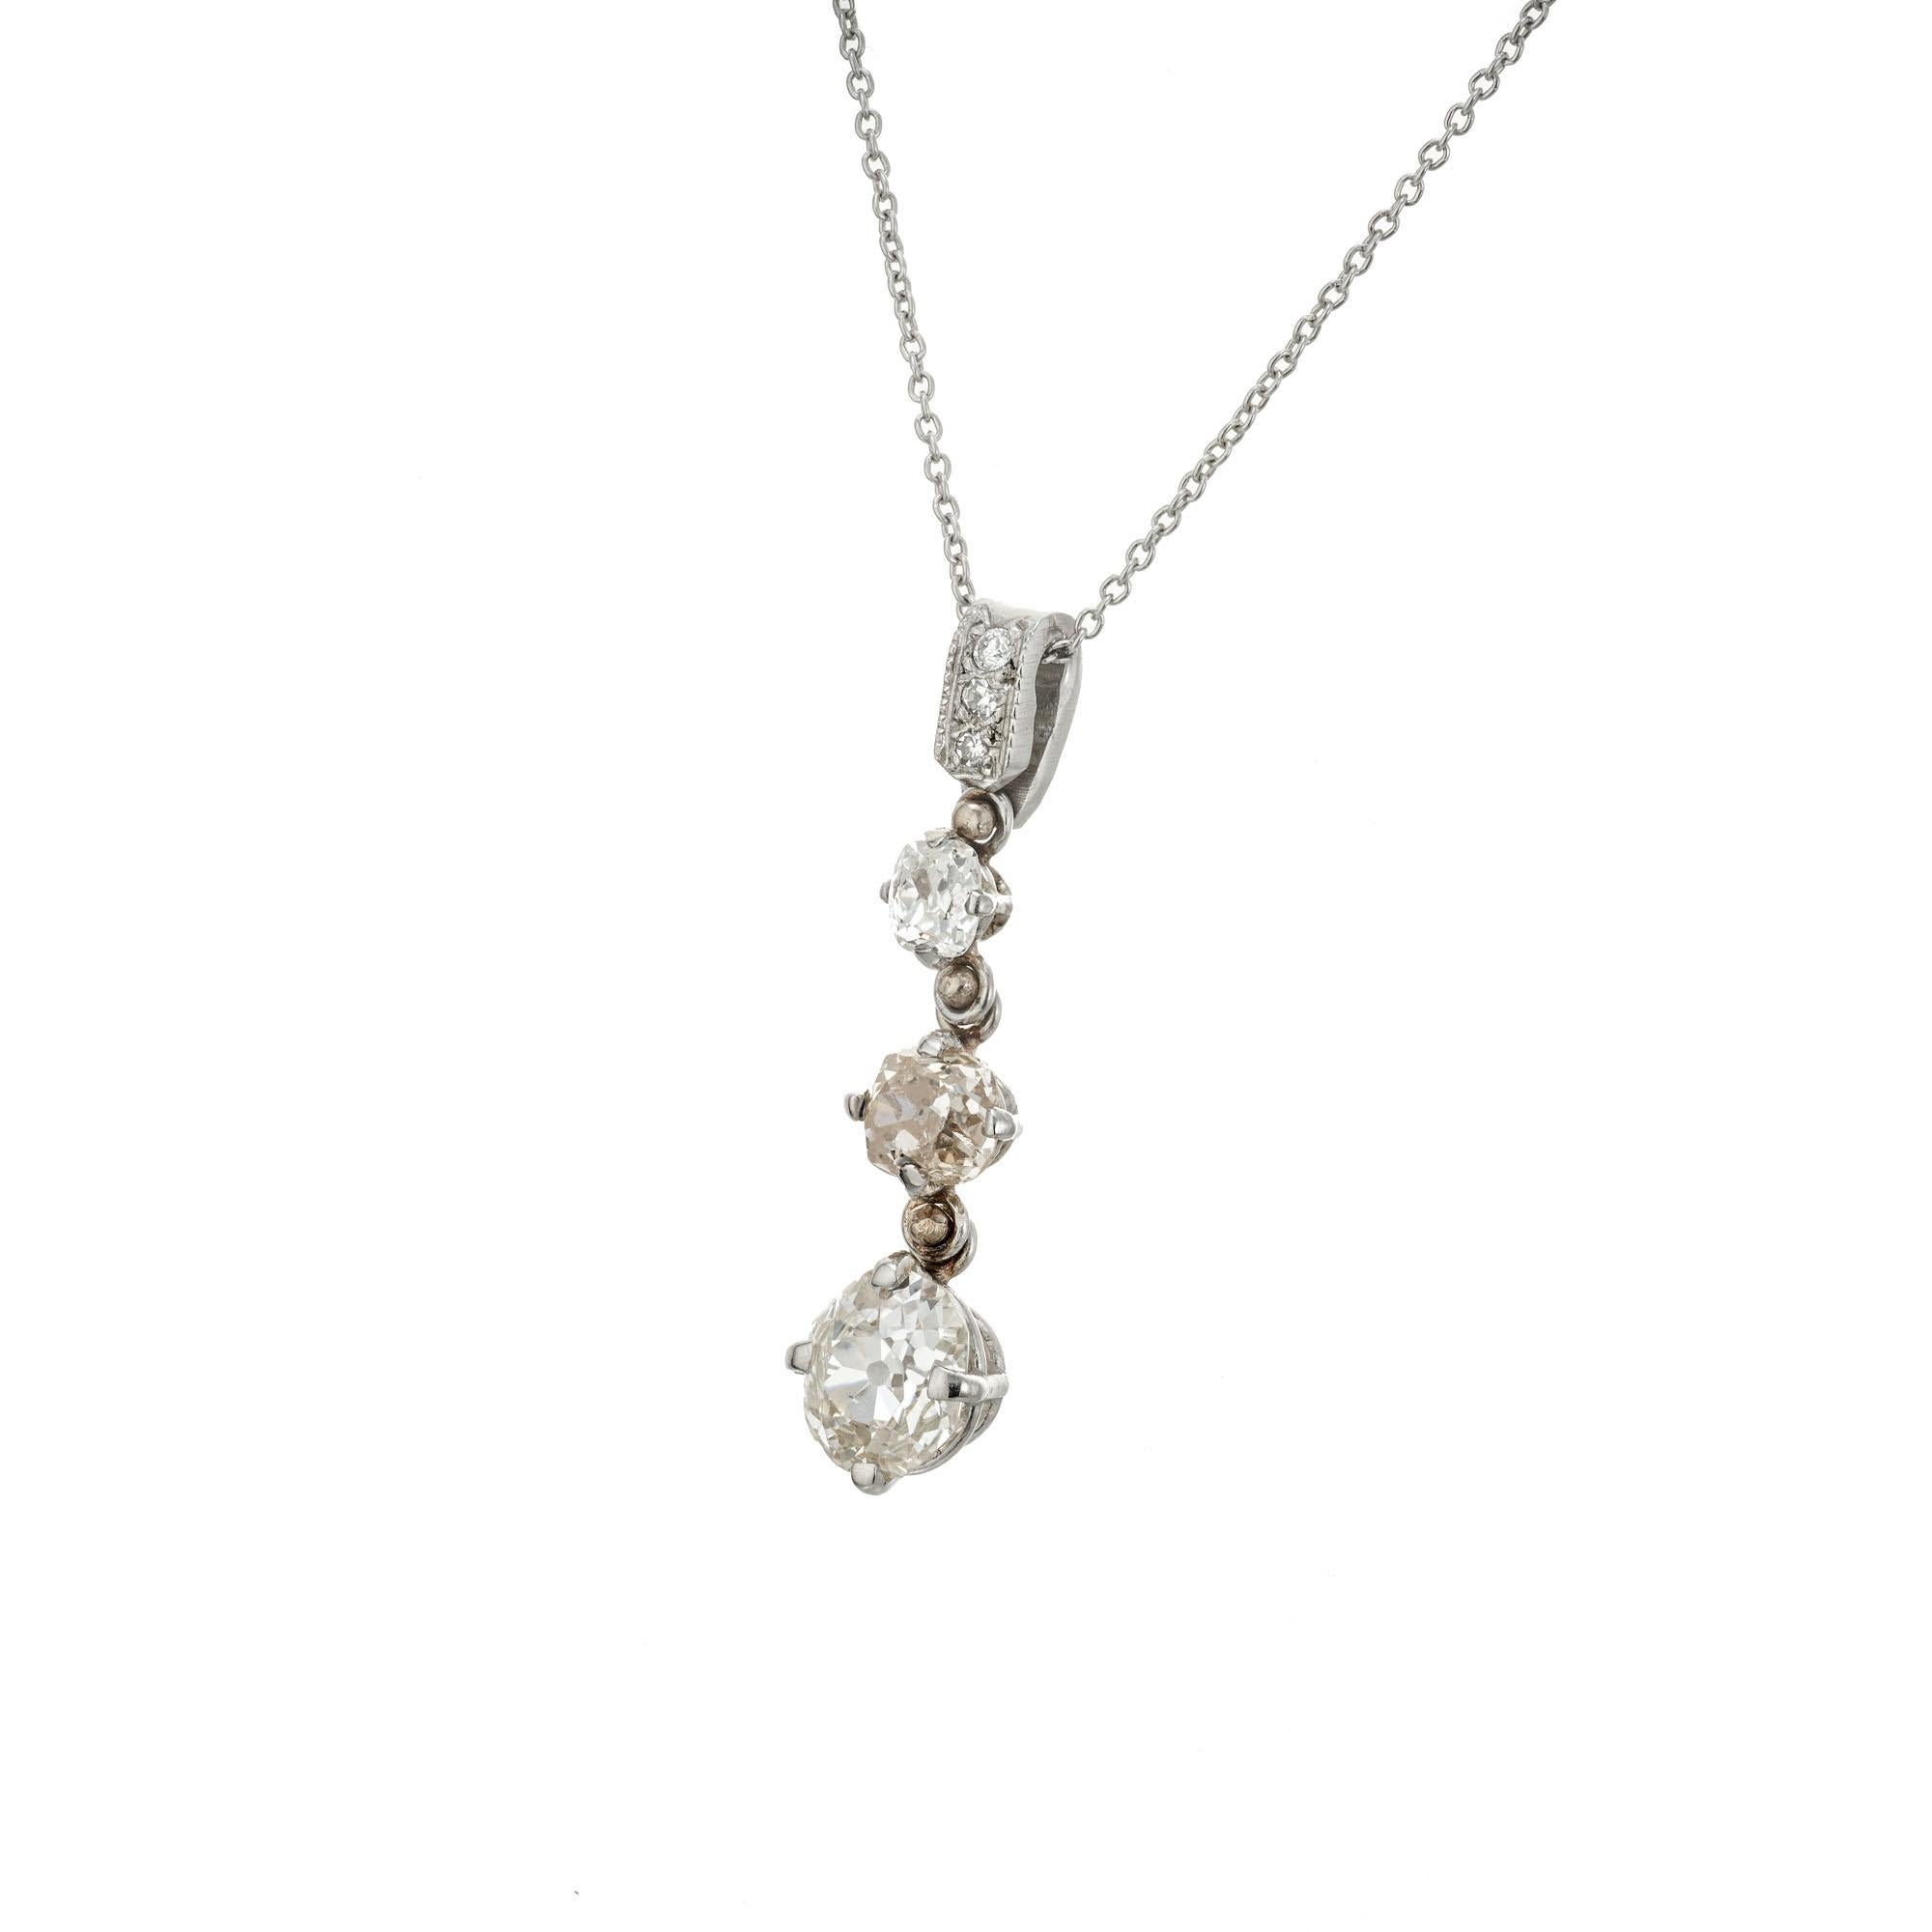 Handmade 3 stone pendant necklace. EGL certified .65 Old Mine cut diamond with 2 Old Mine cut diamonds above set in Platinum with a 16 inch chain and three diamond bail. Middle diamond is light brown and set sideways. circa 1880-1900. Later platinum